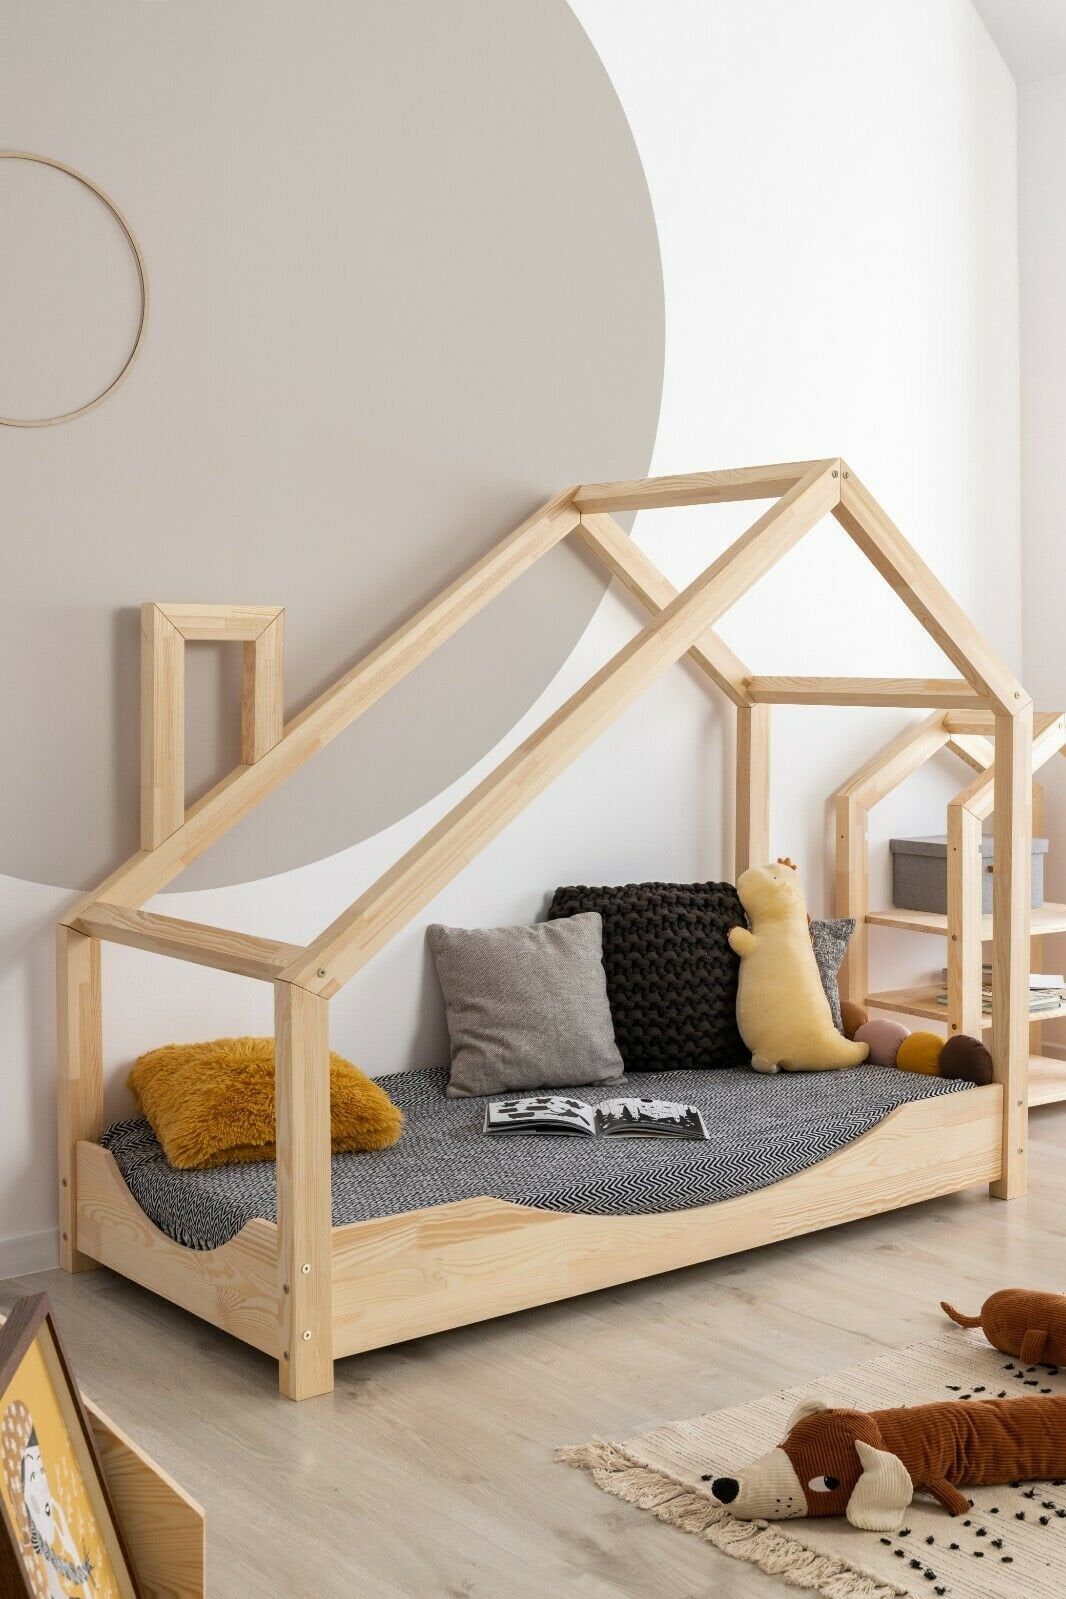 Whimsical Comfort: Toddler Bed Designs for Sweet Dreams